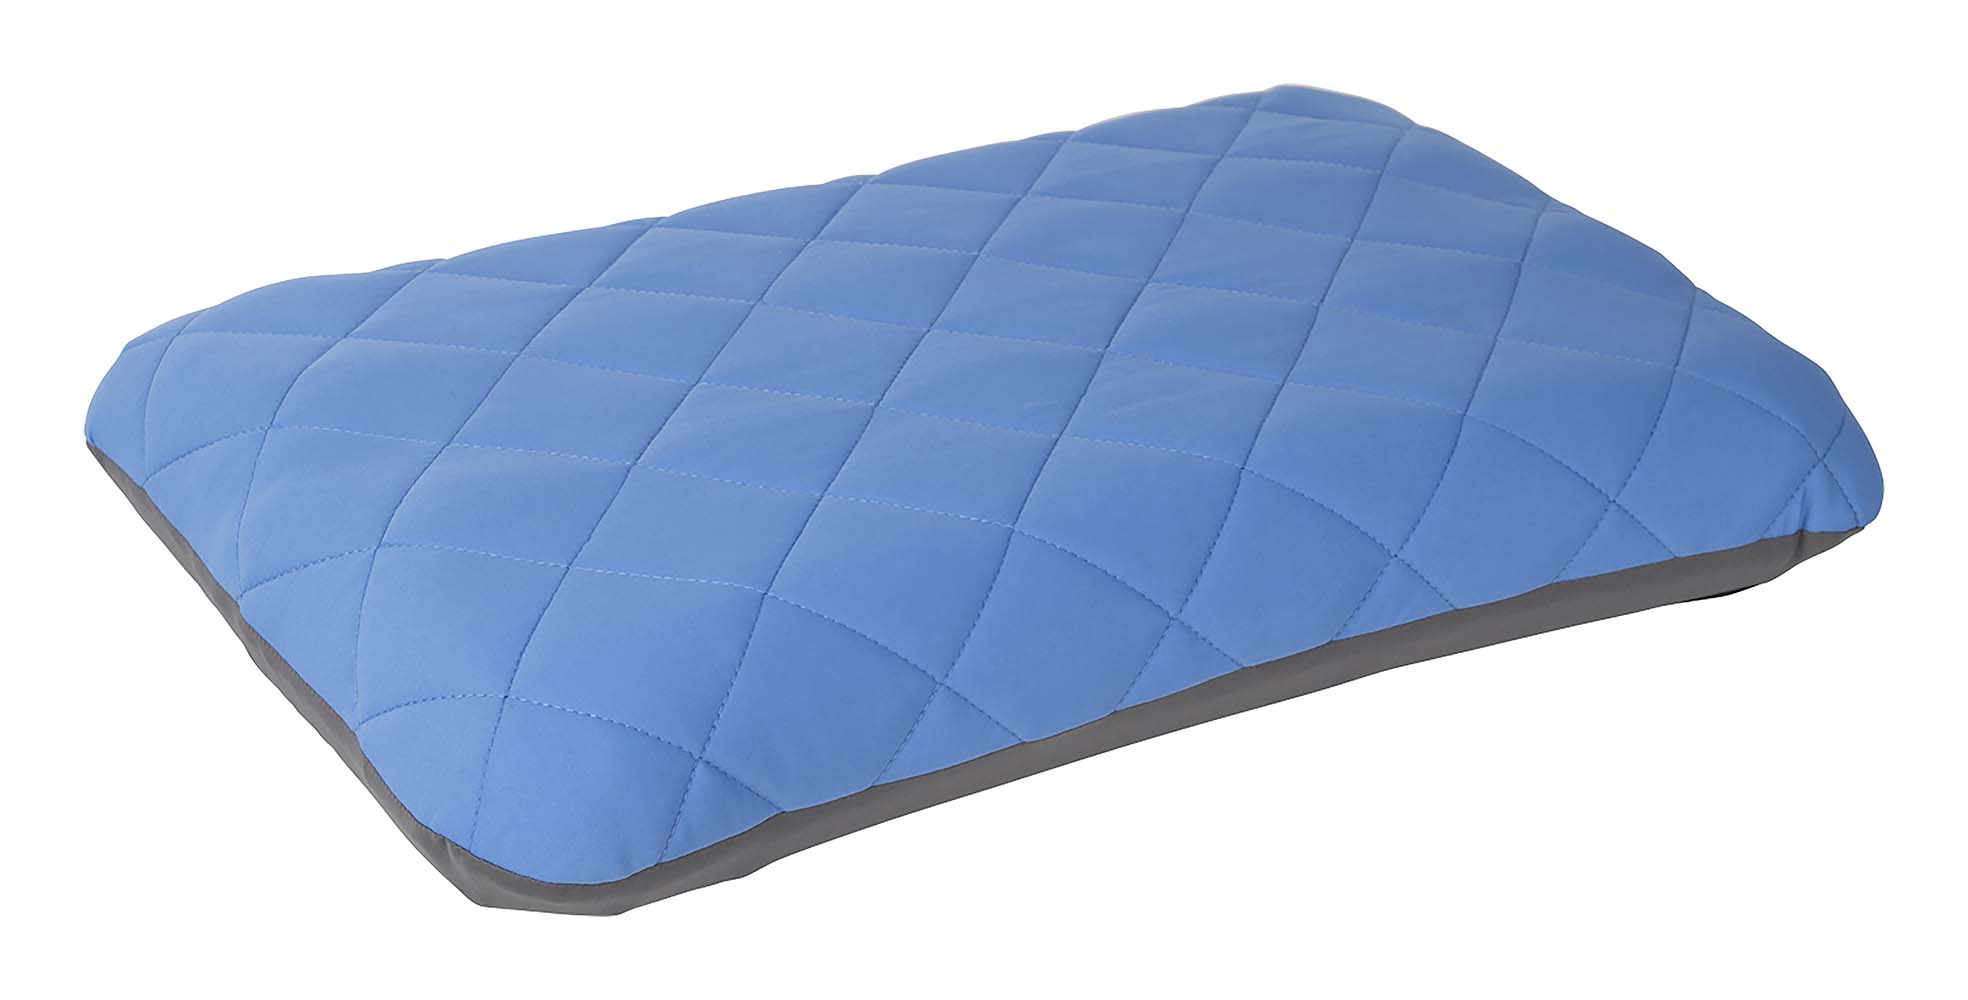 3506635 A luxury inflatable pillow with a 30D Polyester case for extra comfort. The inner cushion is made of strong TPU. Empty very compact to take with you and deliverd including a carrier bag.